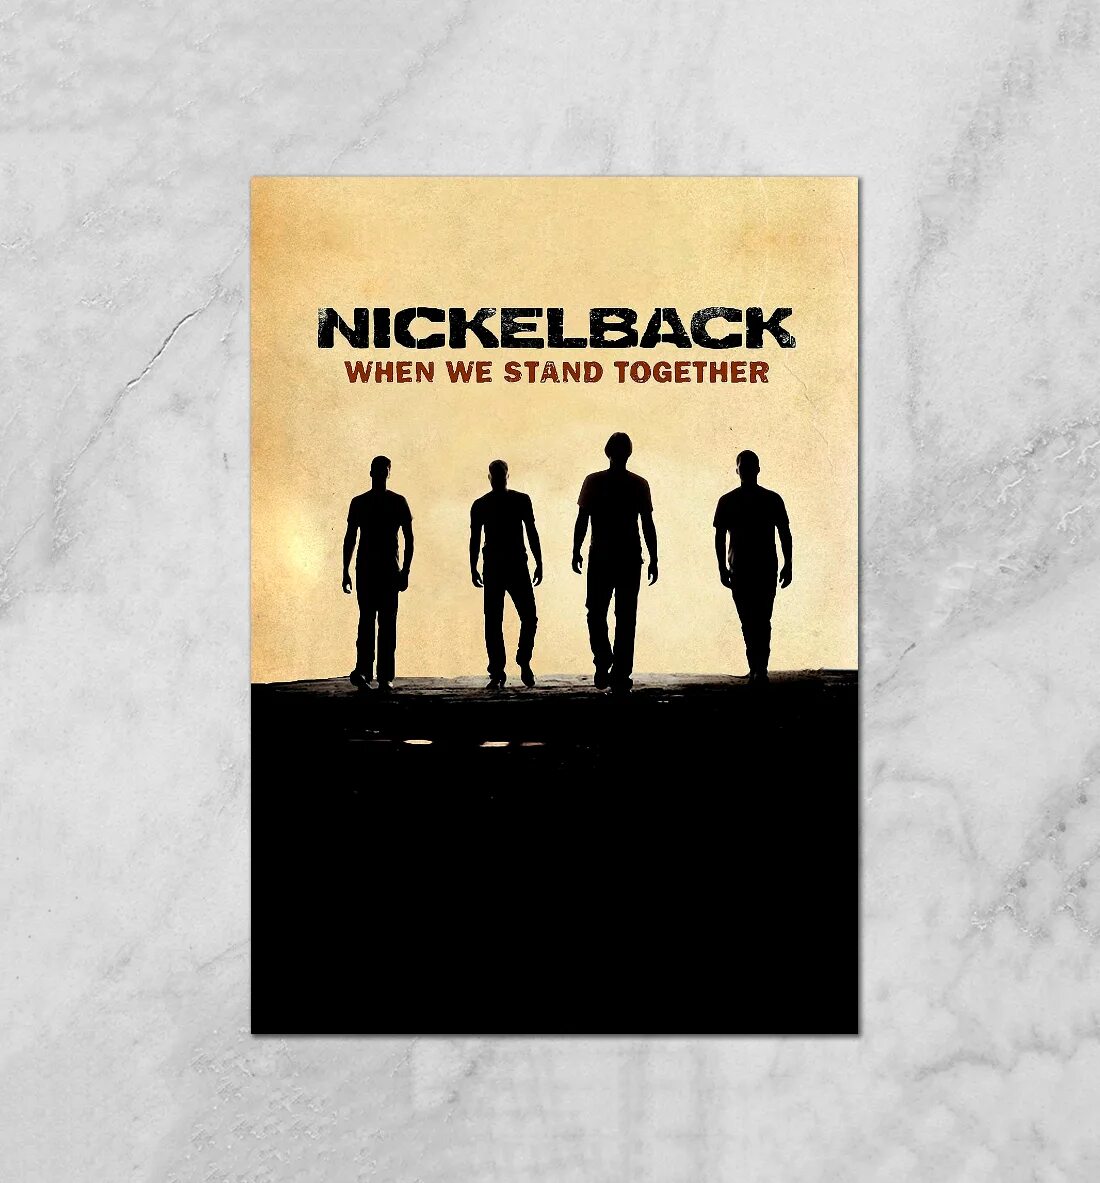 He stands we stand. Nickelback when we Stand together. Плакат Nickelback. Nickelback Постер. Никельбэк when we Stand together.